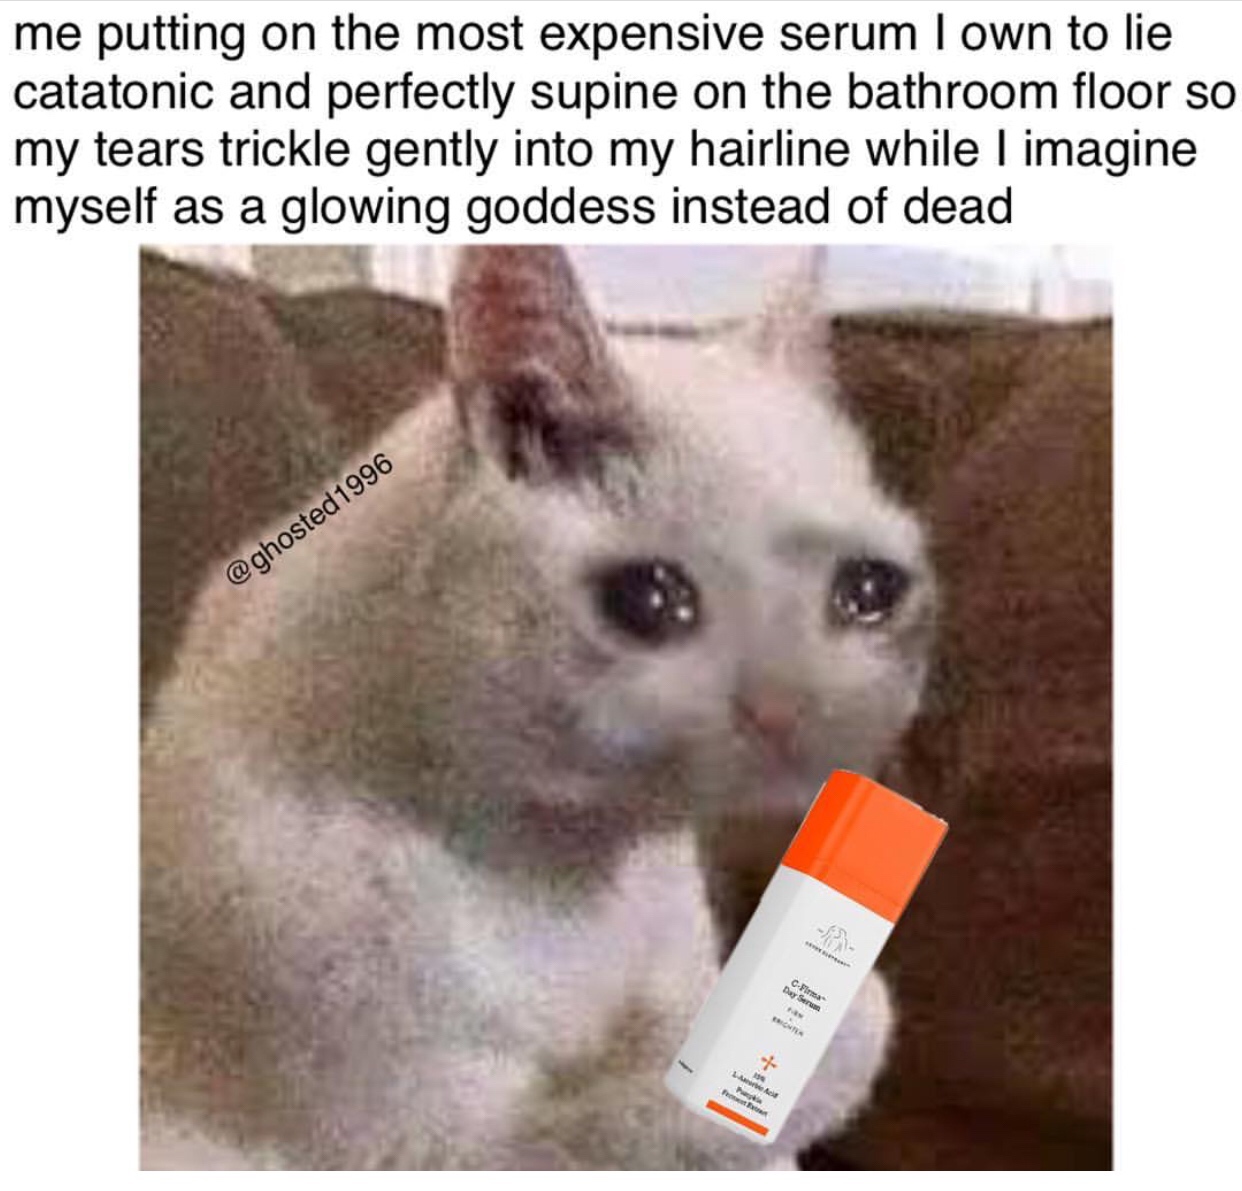 me putting on the most expensive serum I own to lie catatonic and perfectly supine on the bathroom floor so my tears trickle gently into my hairline while I imagine myself as a glowing goddess instead of dead 1996 C Firma Day Ser